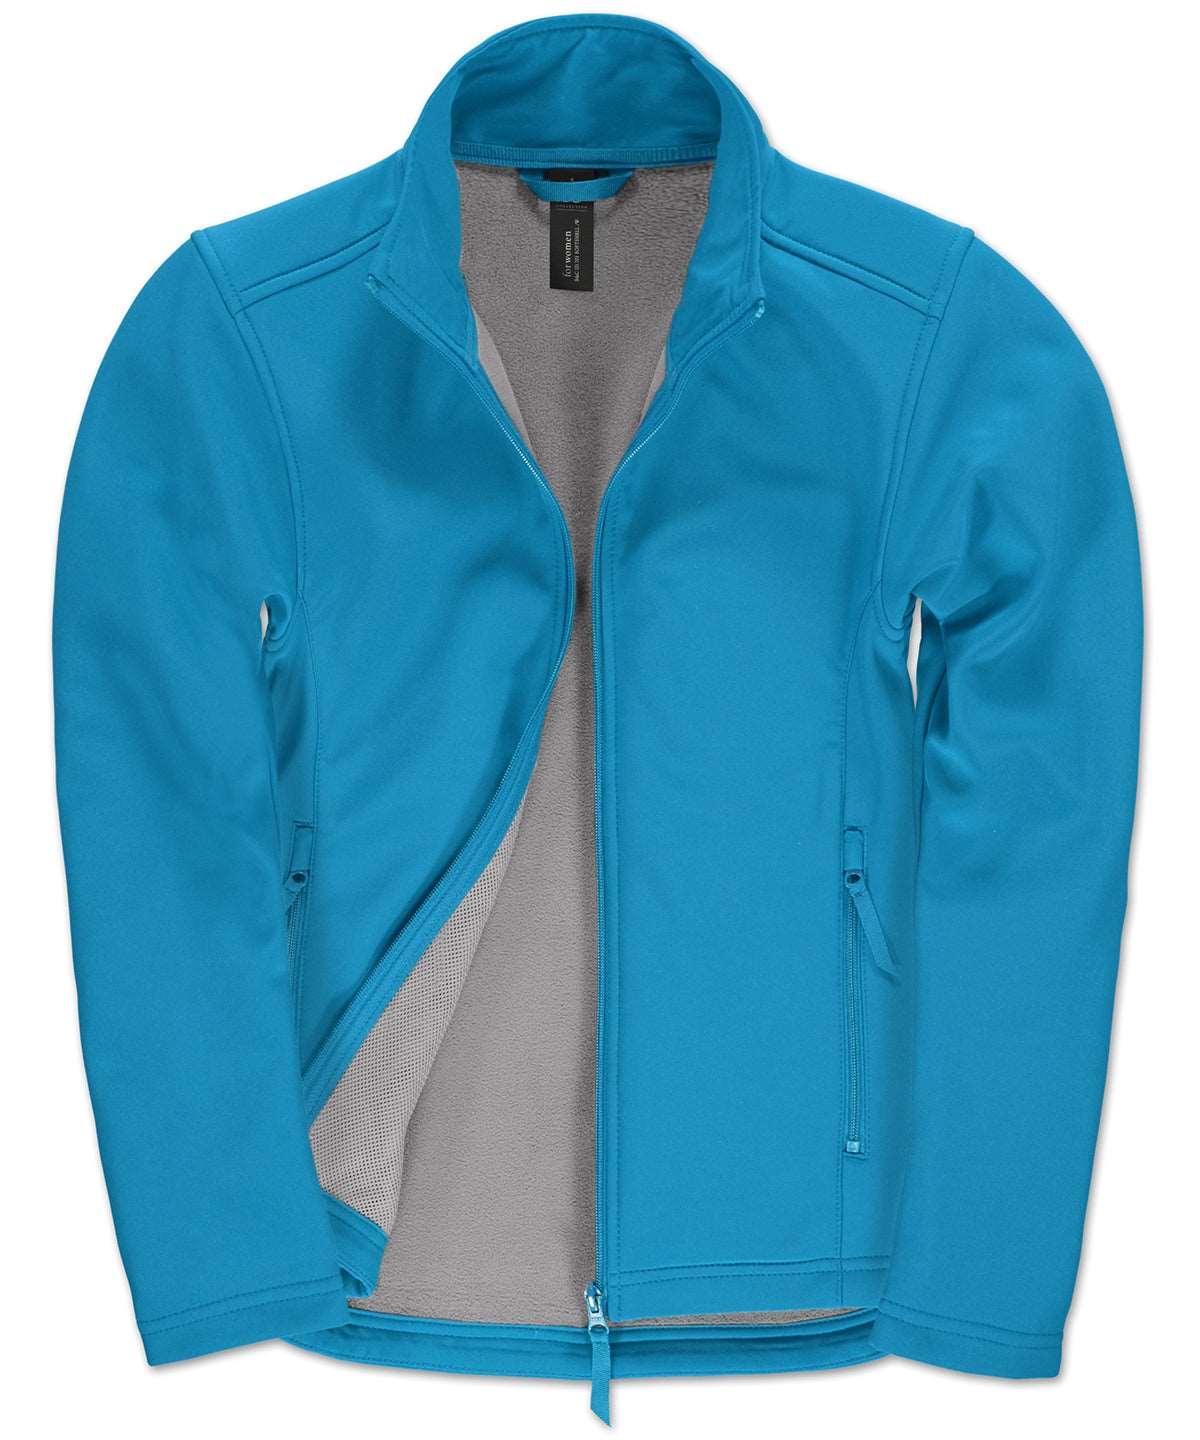 Atoll/Attitude Grey Lining - B&C ID.701 Softshell jacket /women Jackets B&C Collection Hyperbrights and Neons, Jackets & Coats, Softshells, Workwear Schoolwear Centres